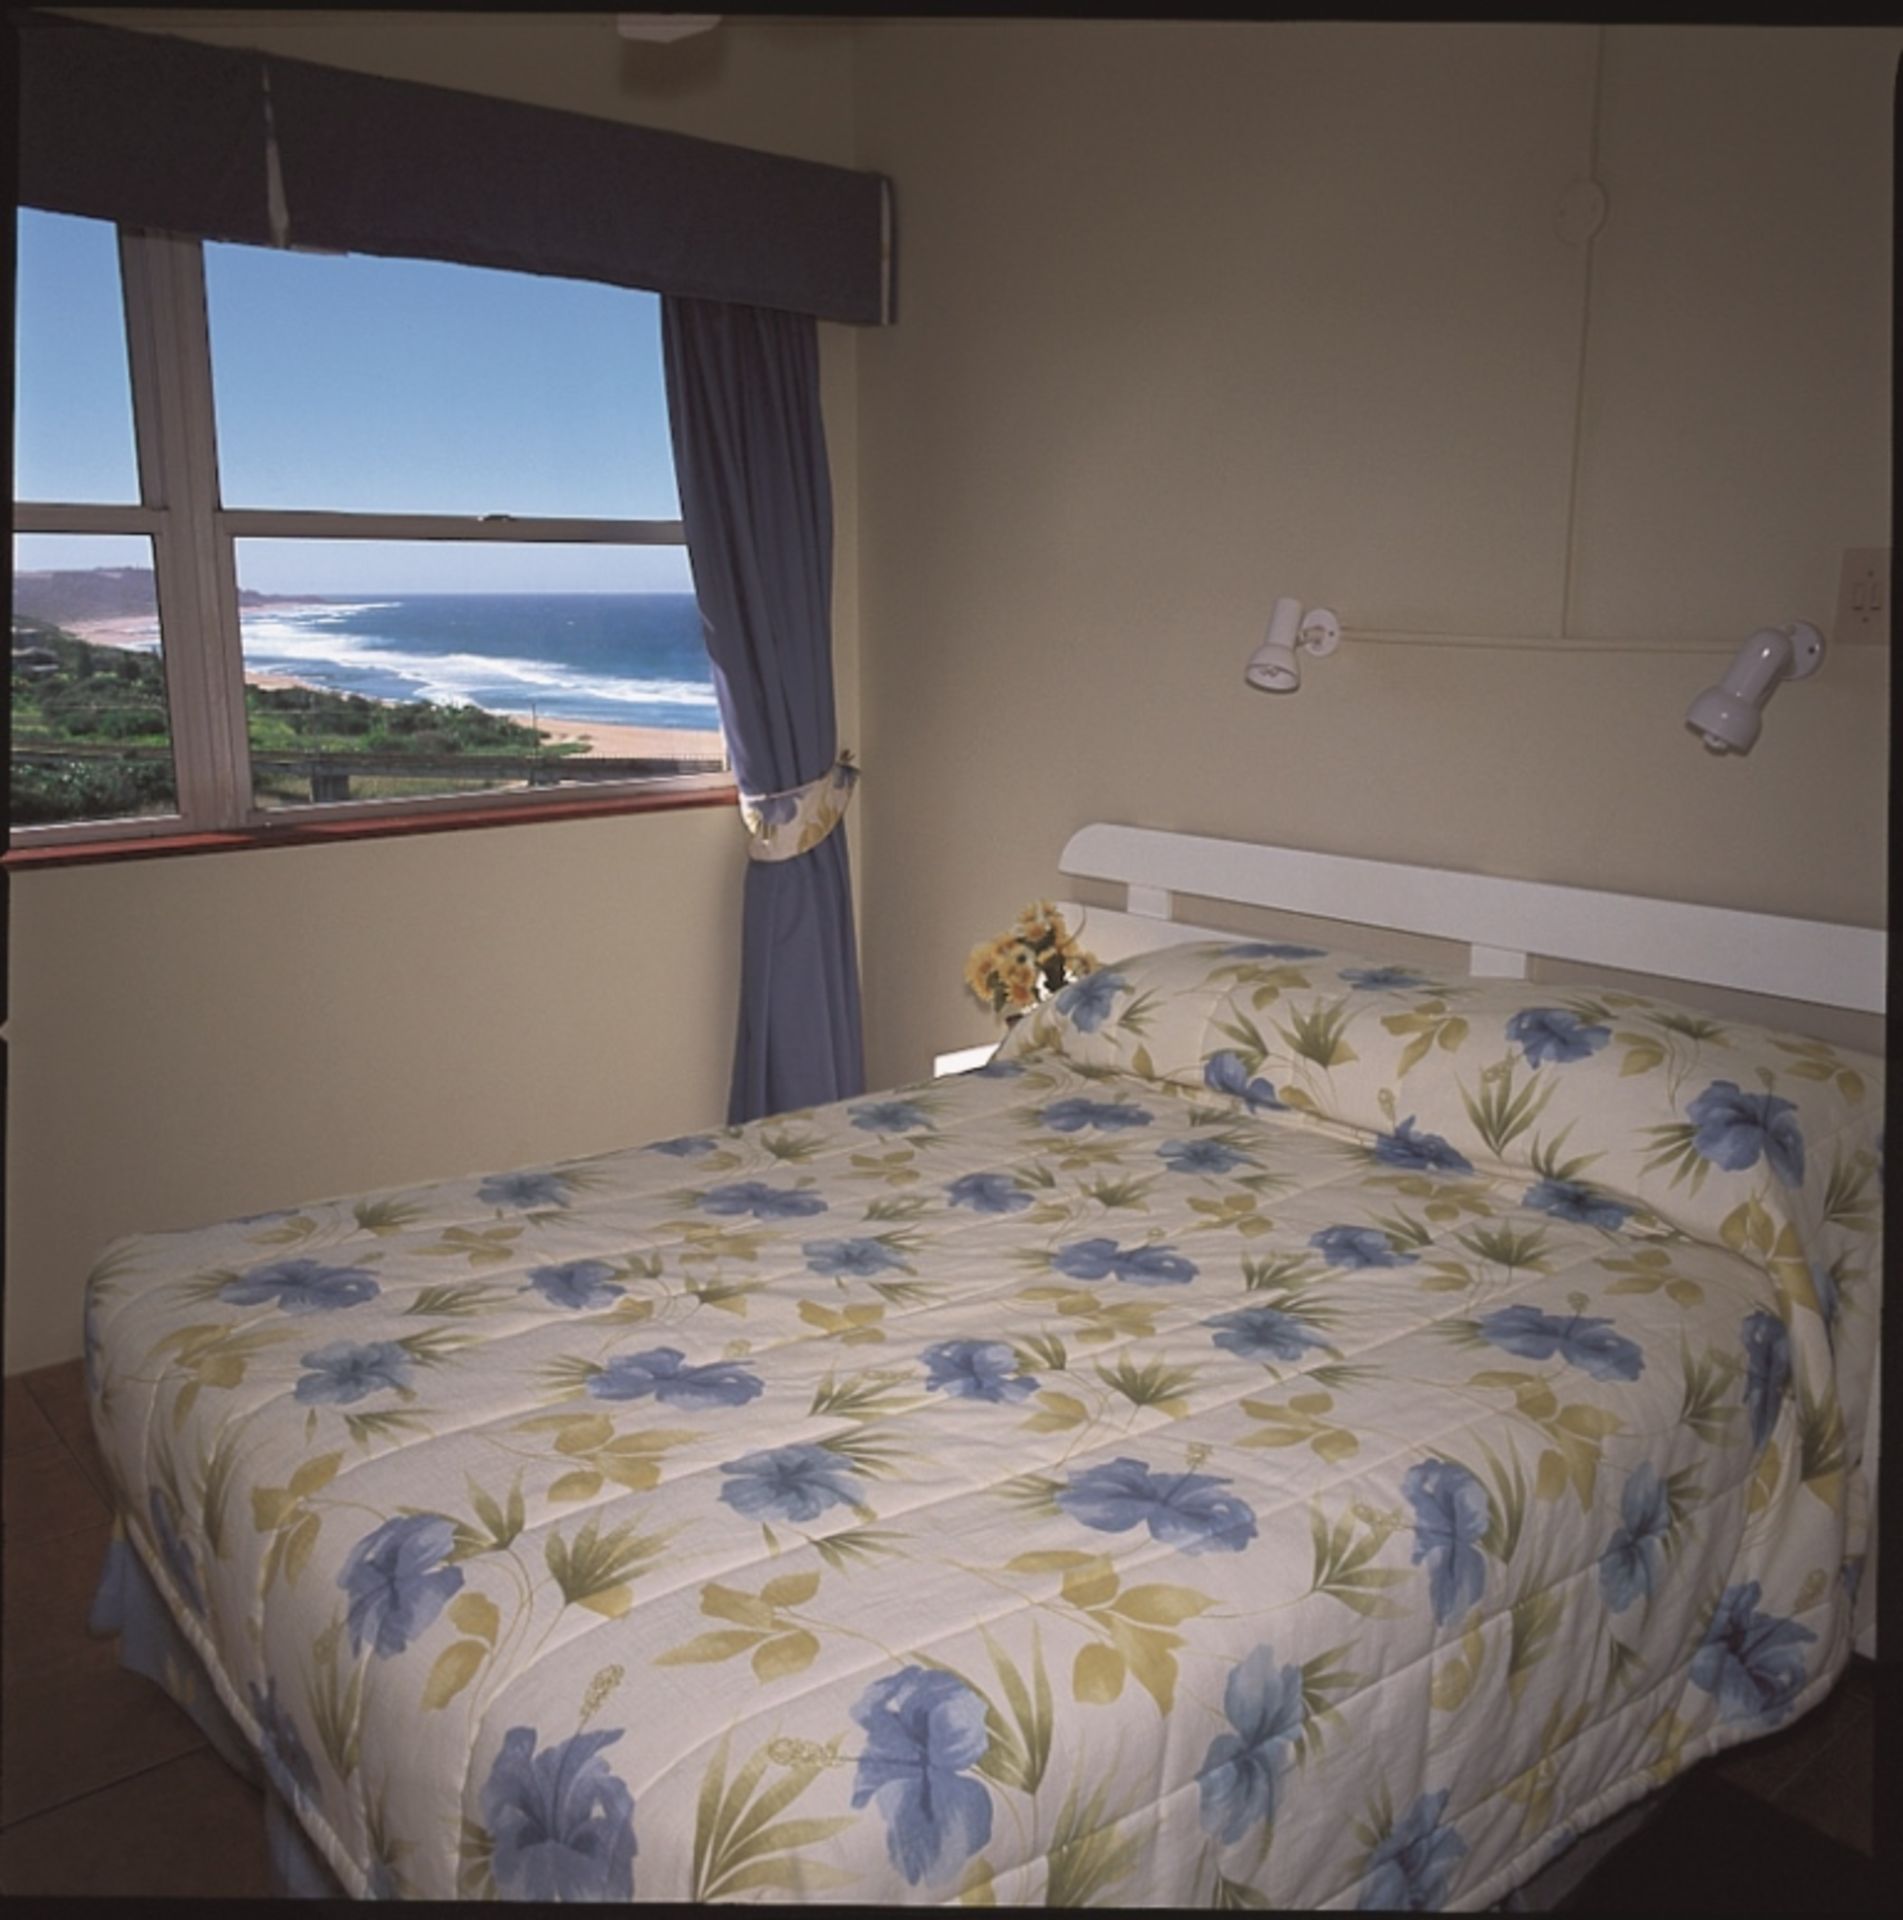 Pearly Shells - 2 Beds (6 Sleepers Max) . Date - 06/05/2016 - 13/05/2016 - (Shareblock) - Image 27 of 32